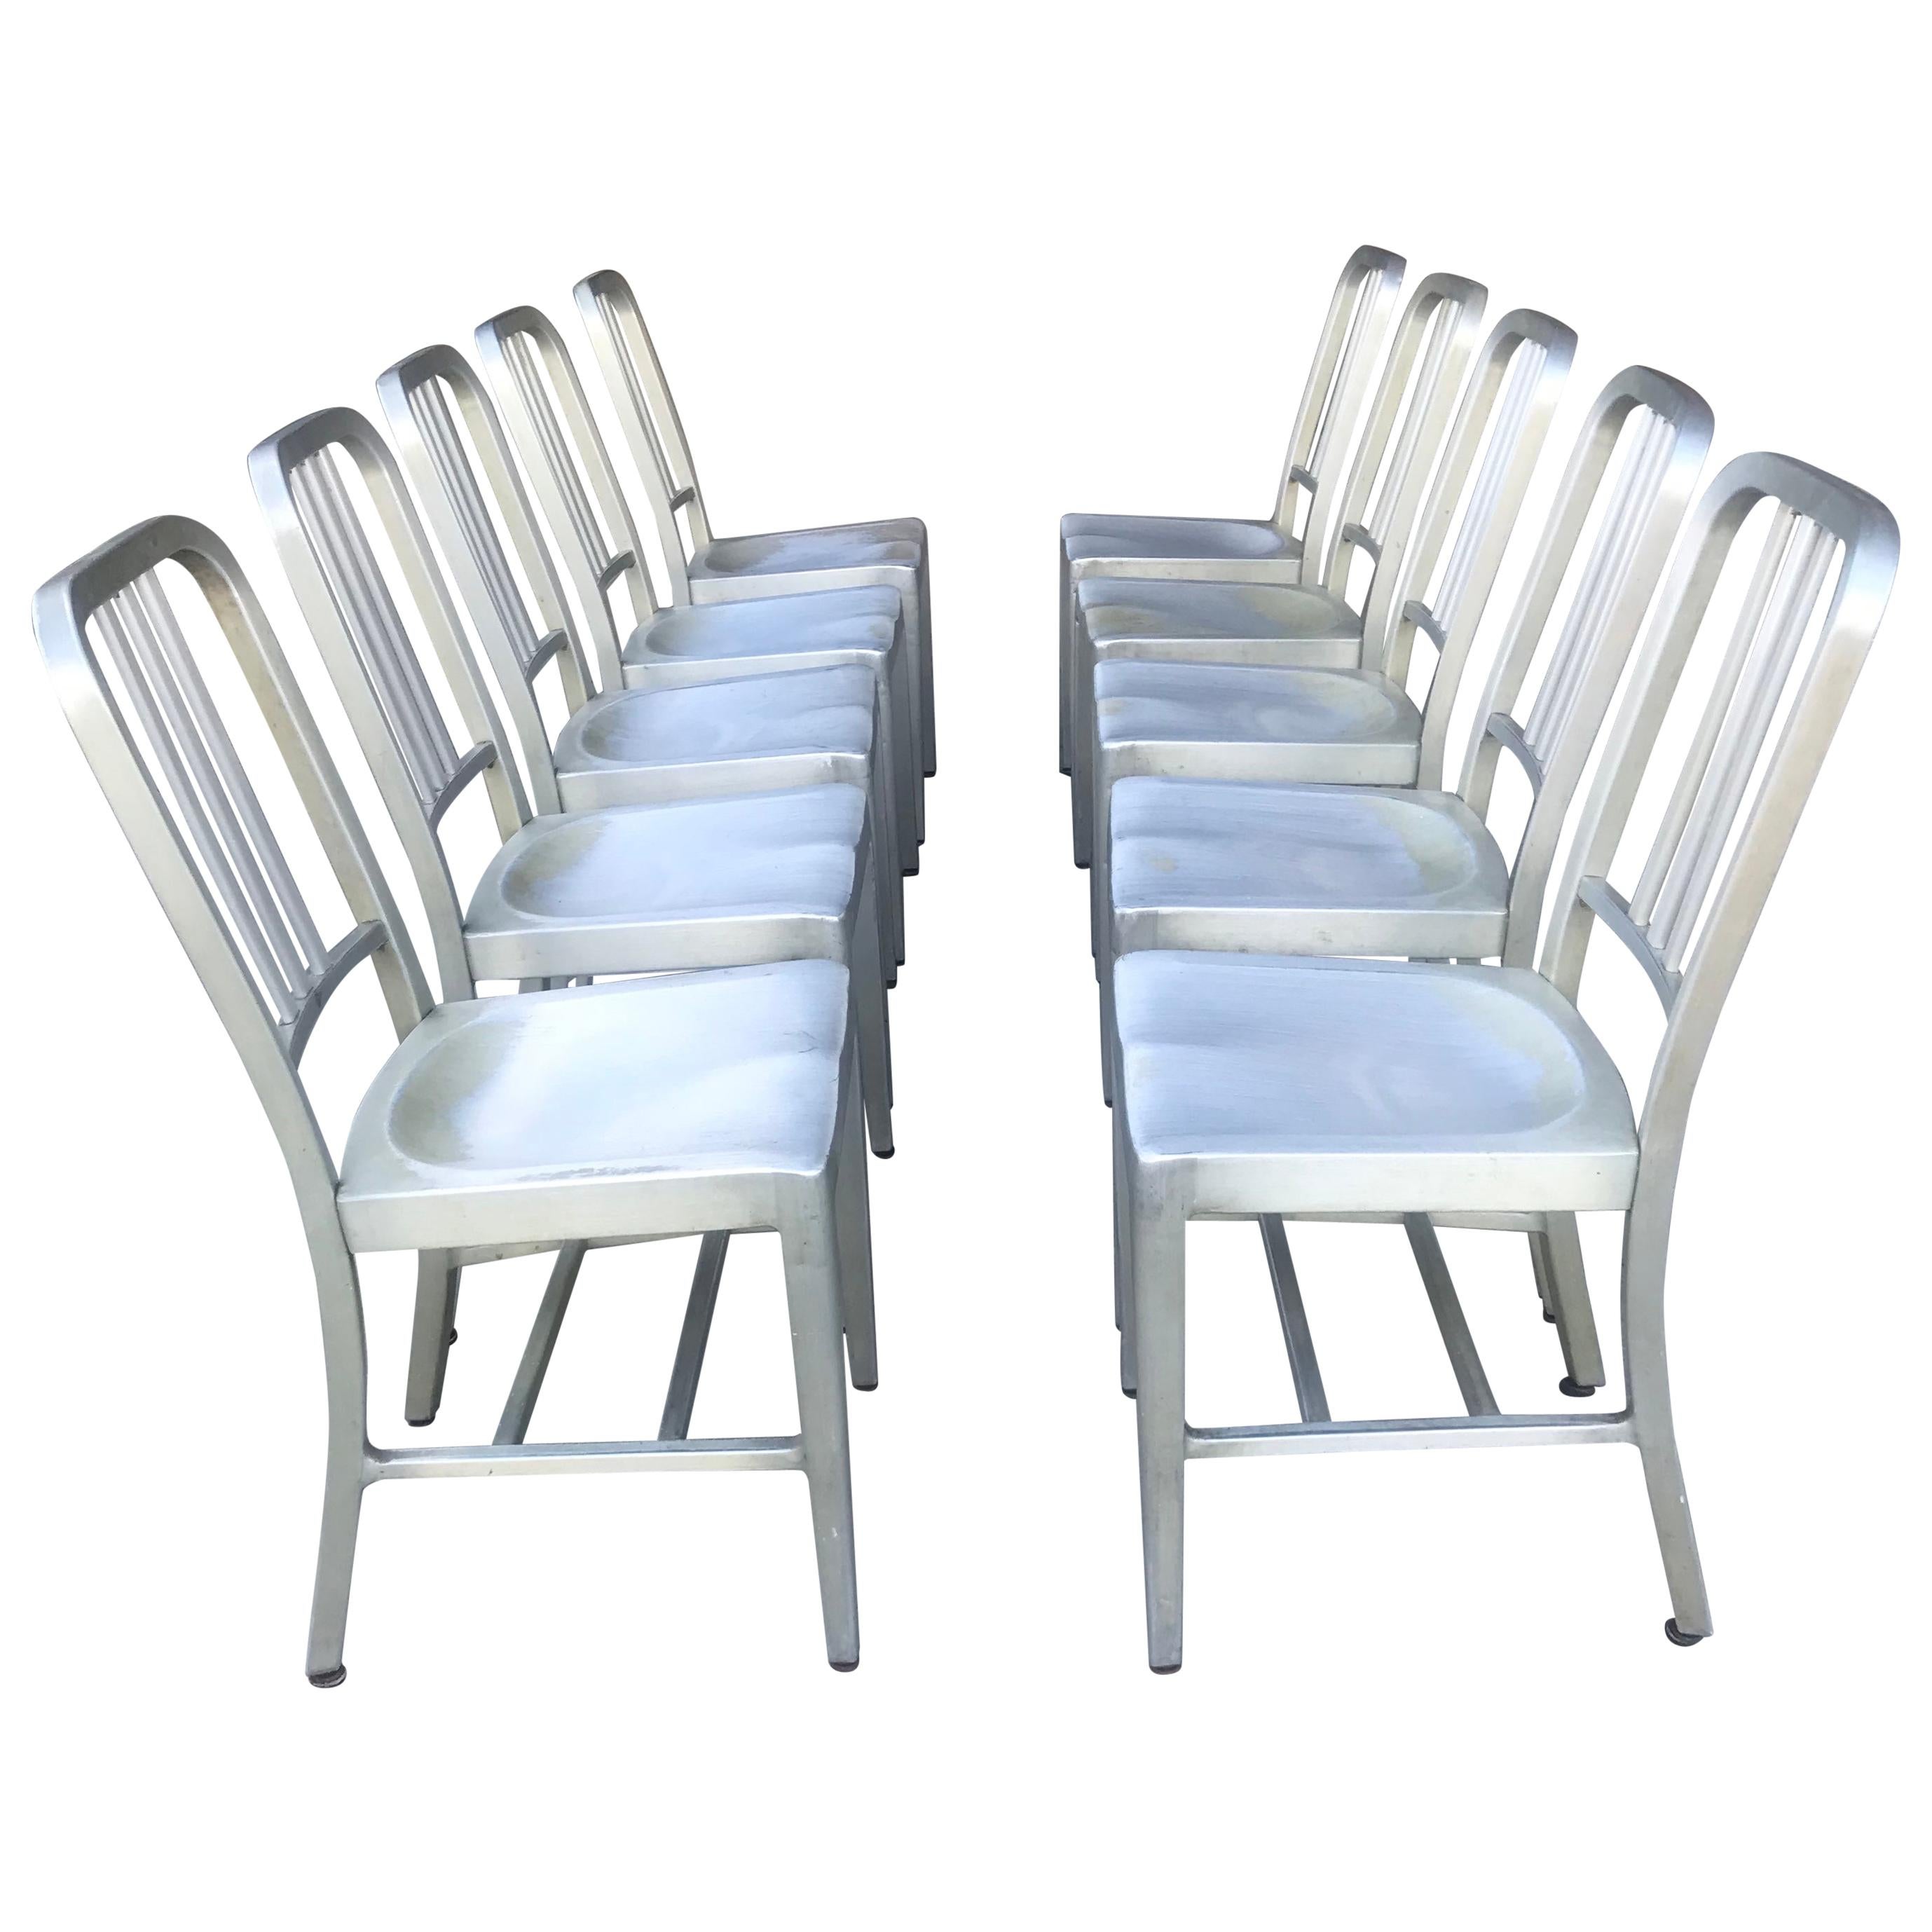 Classic set 10 Goodform All Aluminum Dining Chairs, /side chairs, 